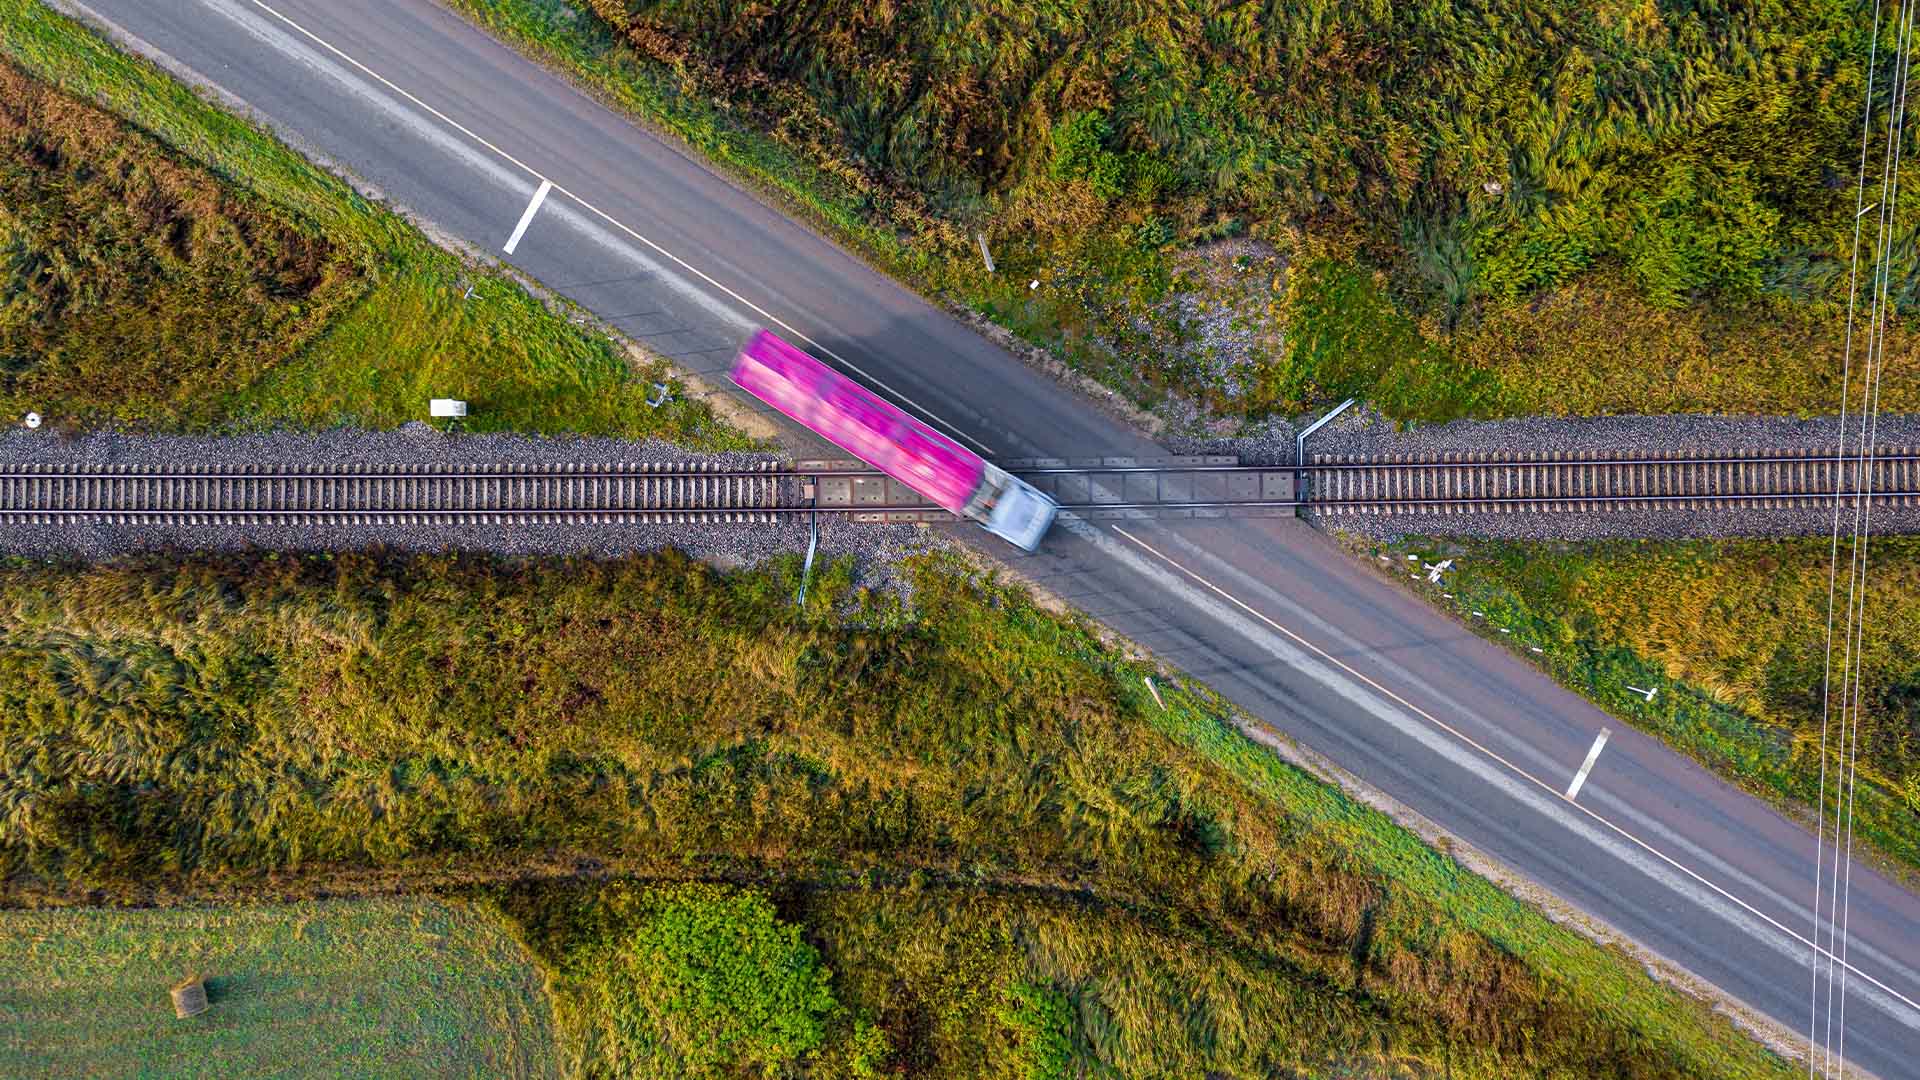 Photo of a freight truck passing over a rail road